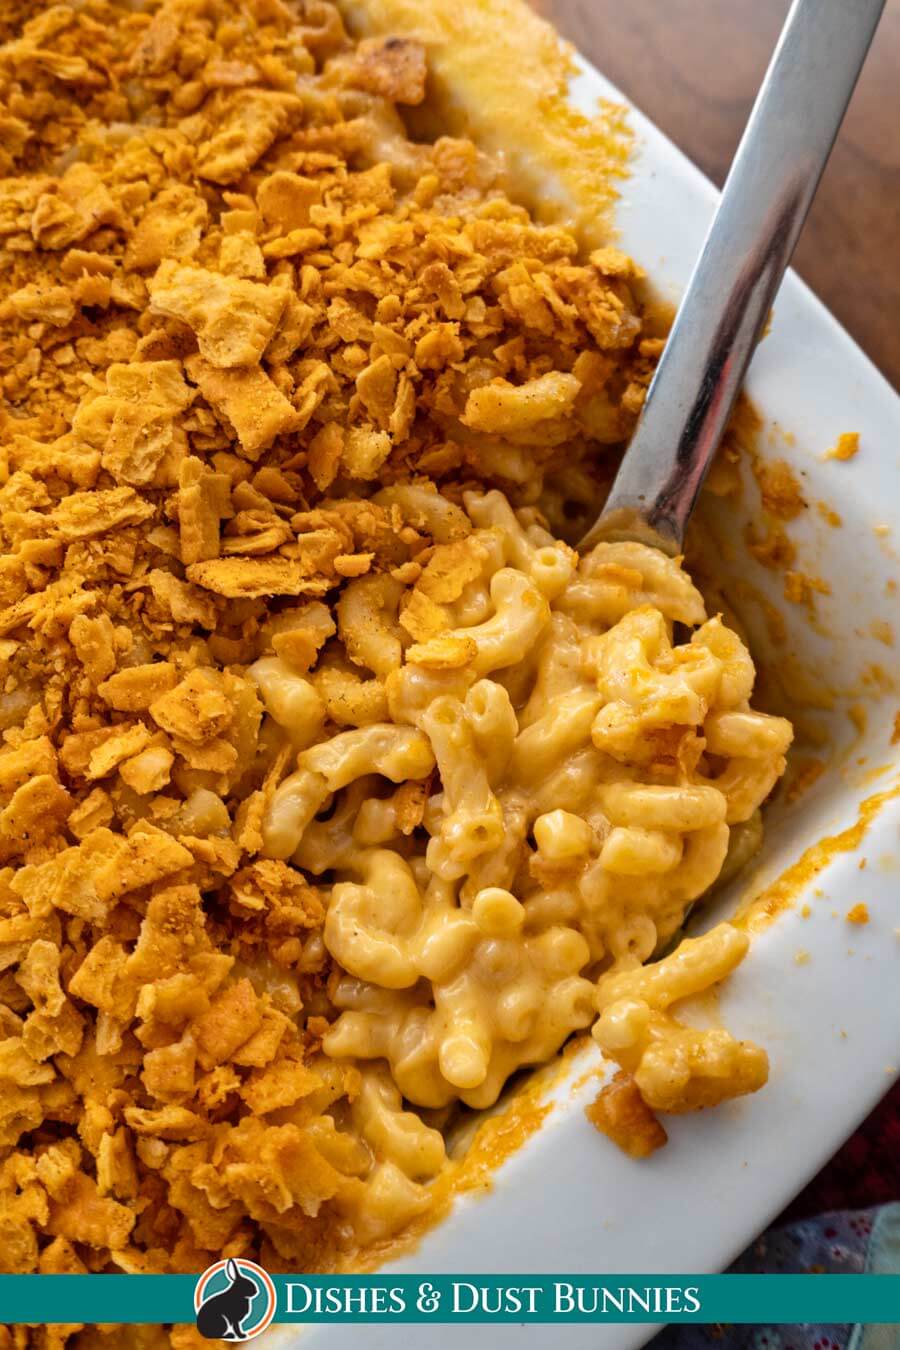 Classic Homemade Baked Mac and Cheese